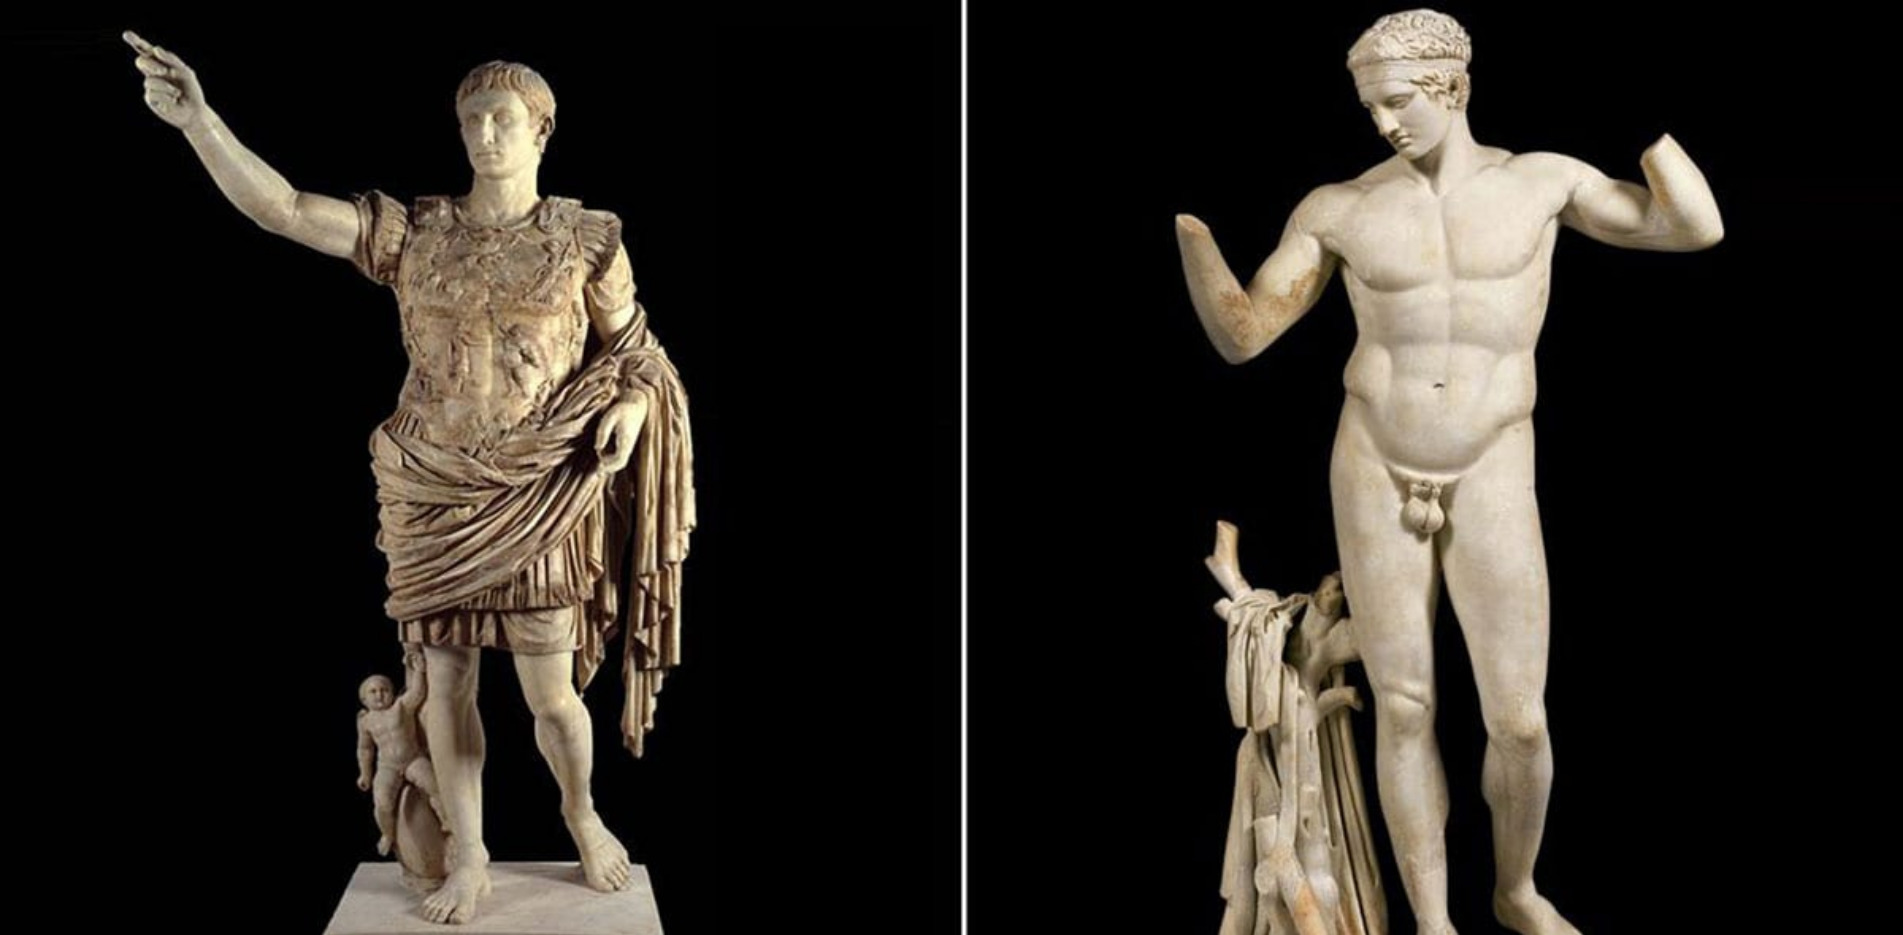  - Statues of Greece vs. Statues of Rome